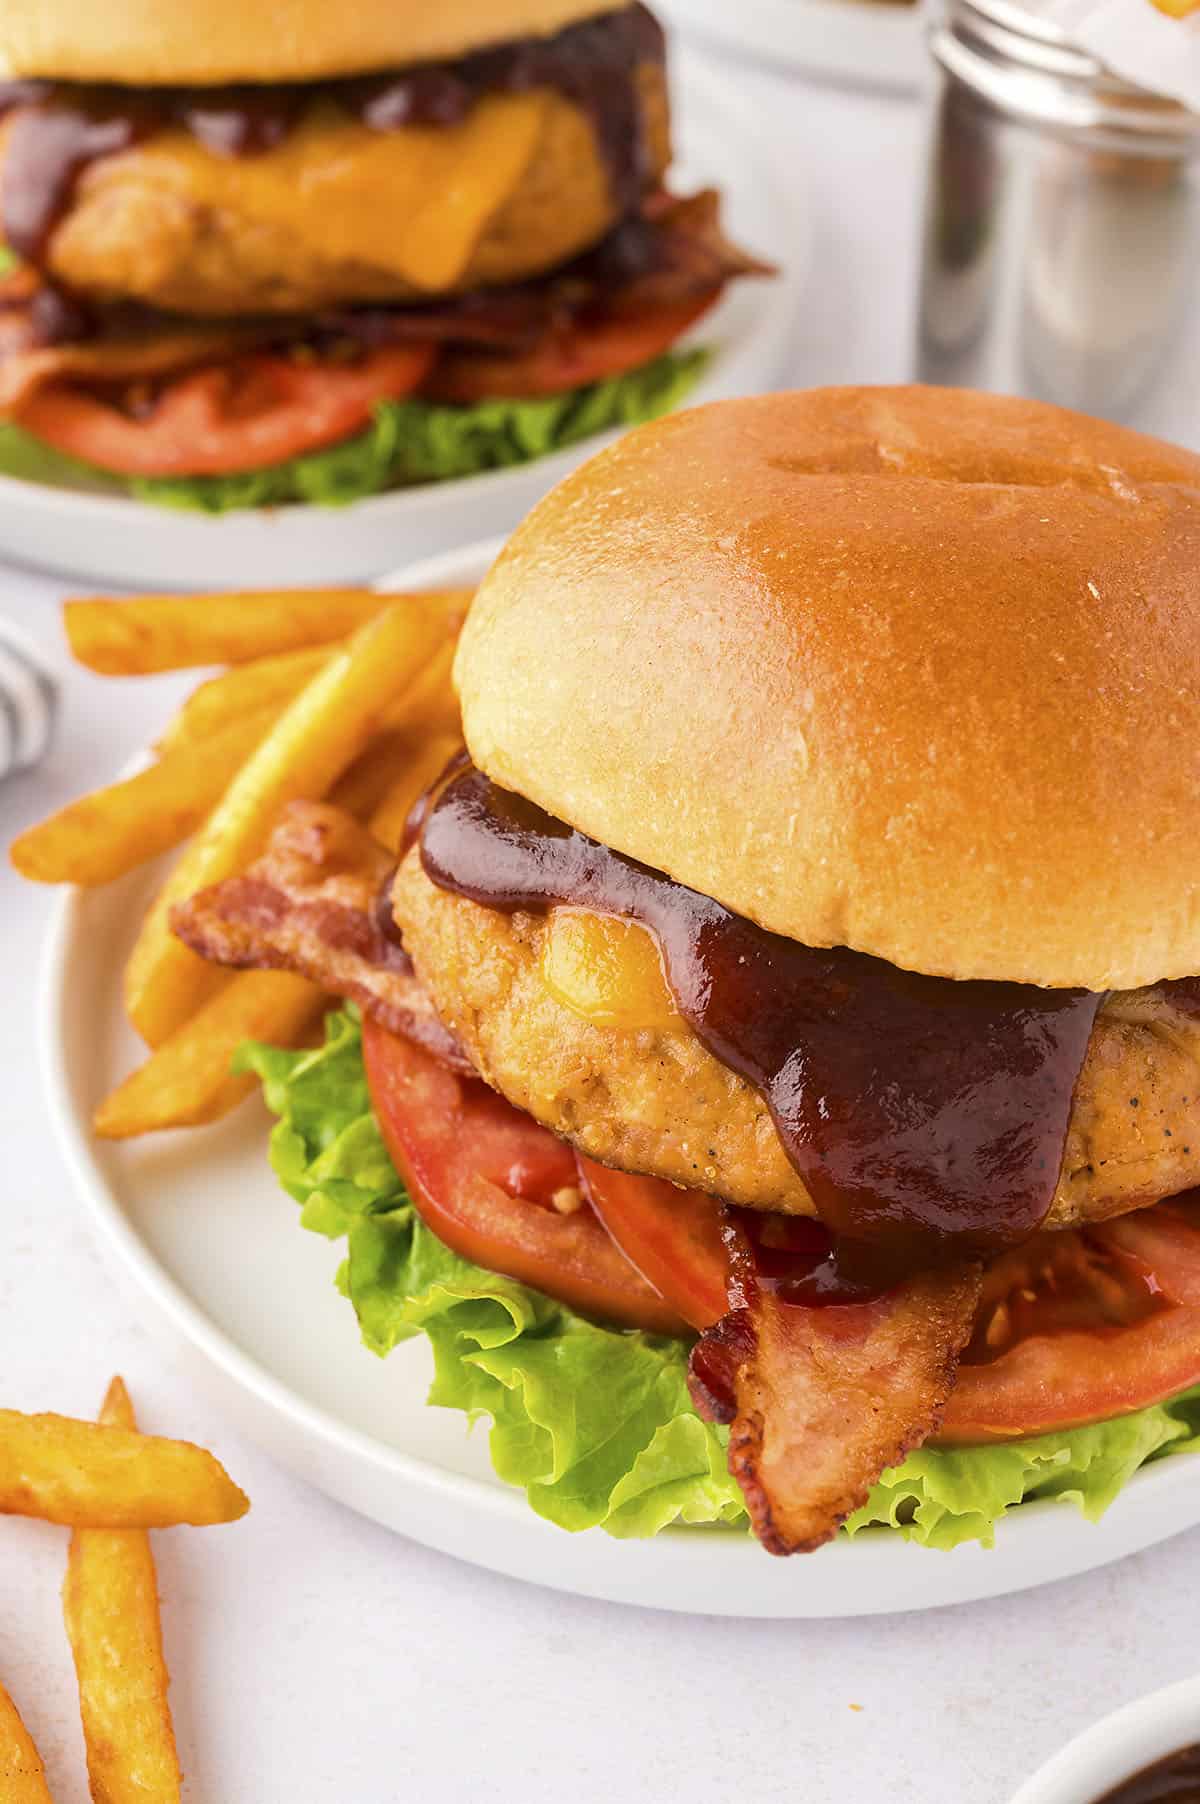 Chicken burger with barbecue sauce and bacon on bun.